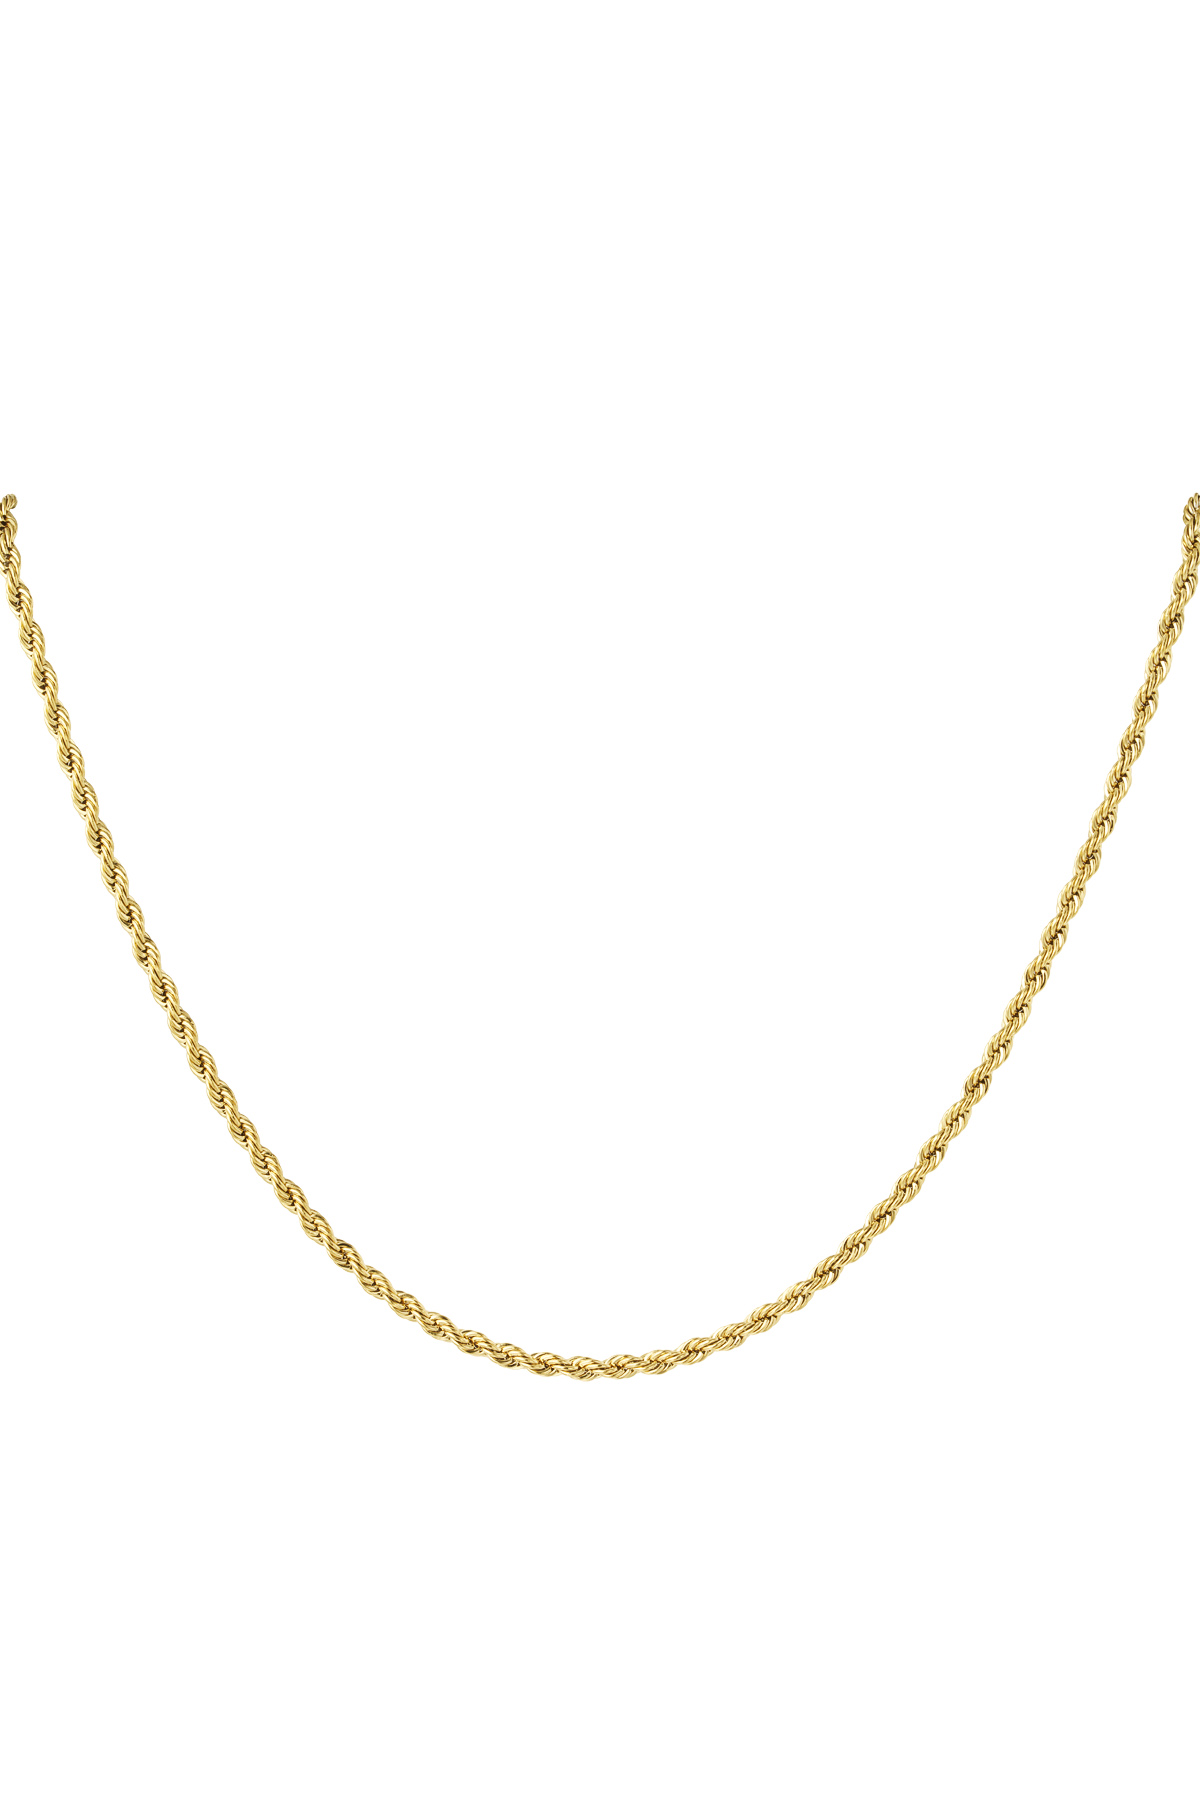 Unisex Stainless Steel Twisted Necklace 60CM - Gold-3.0MM h5 